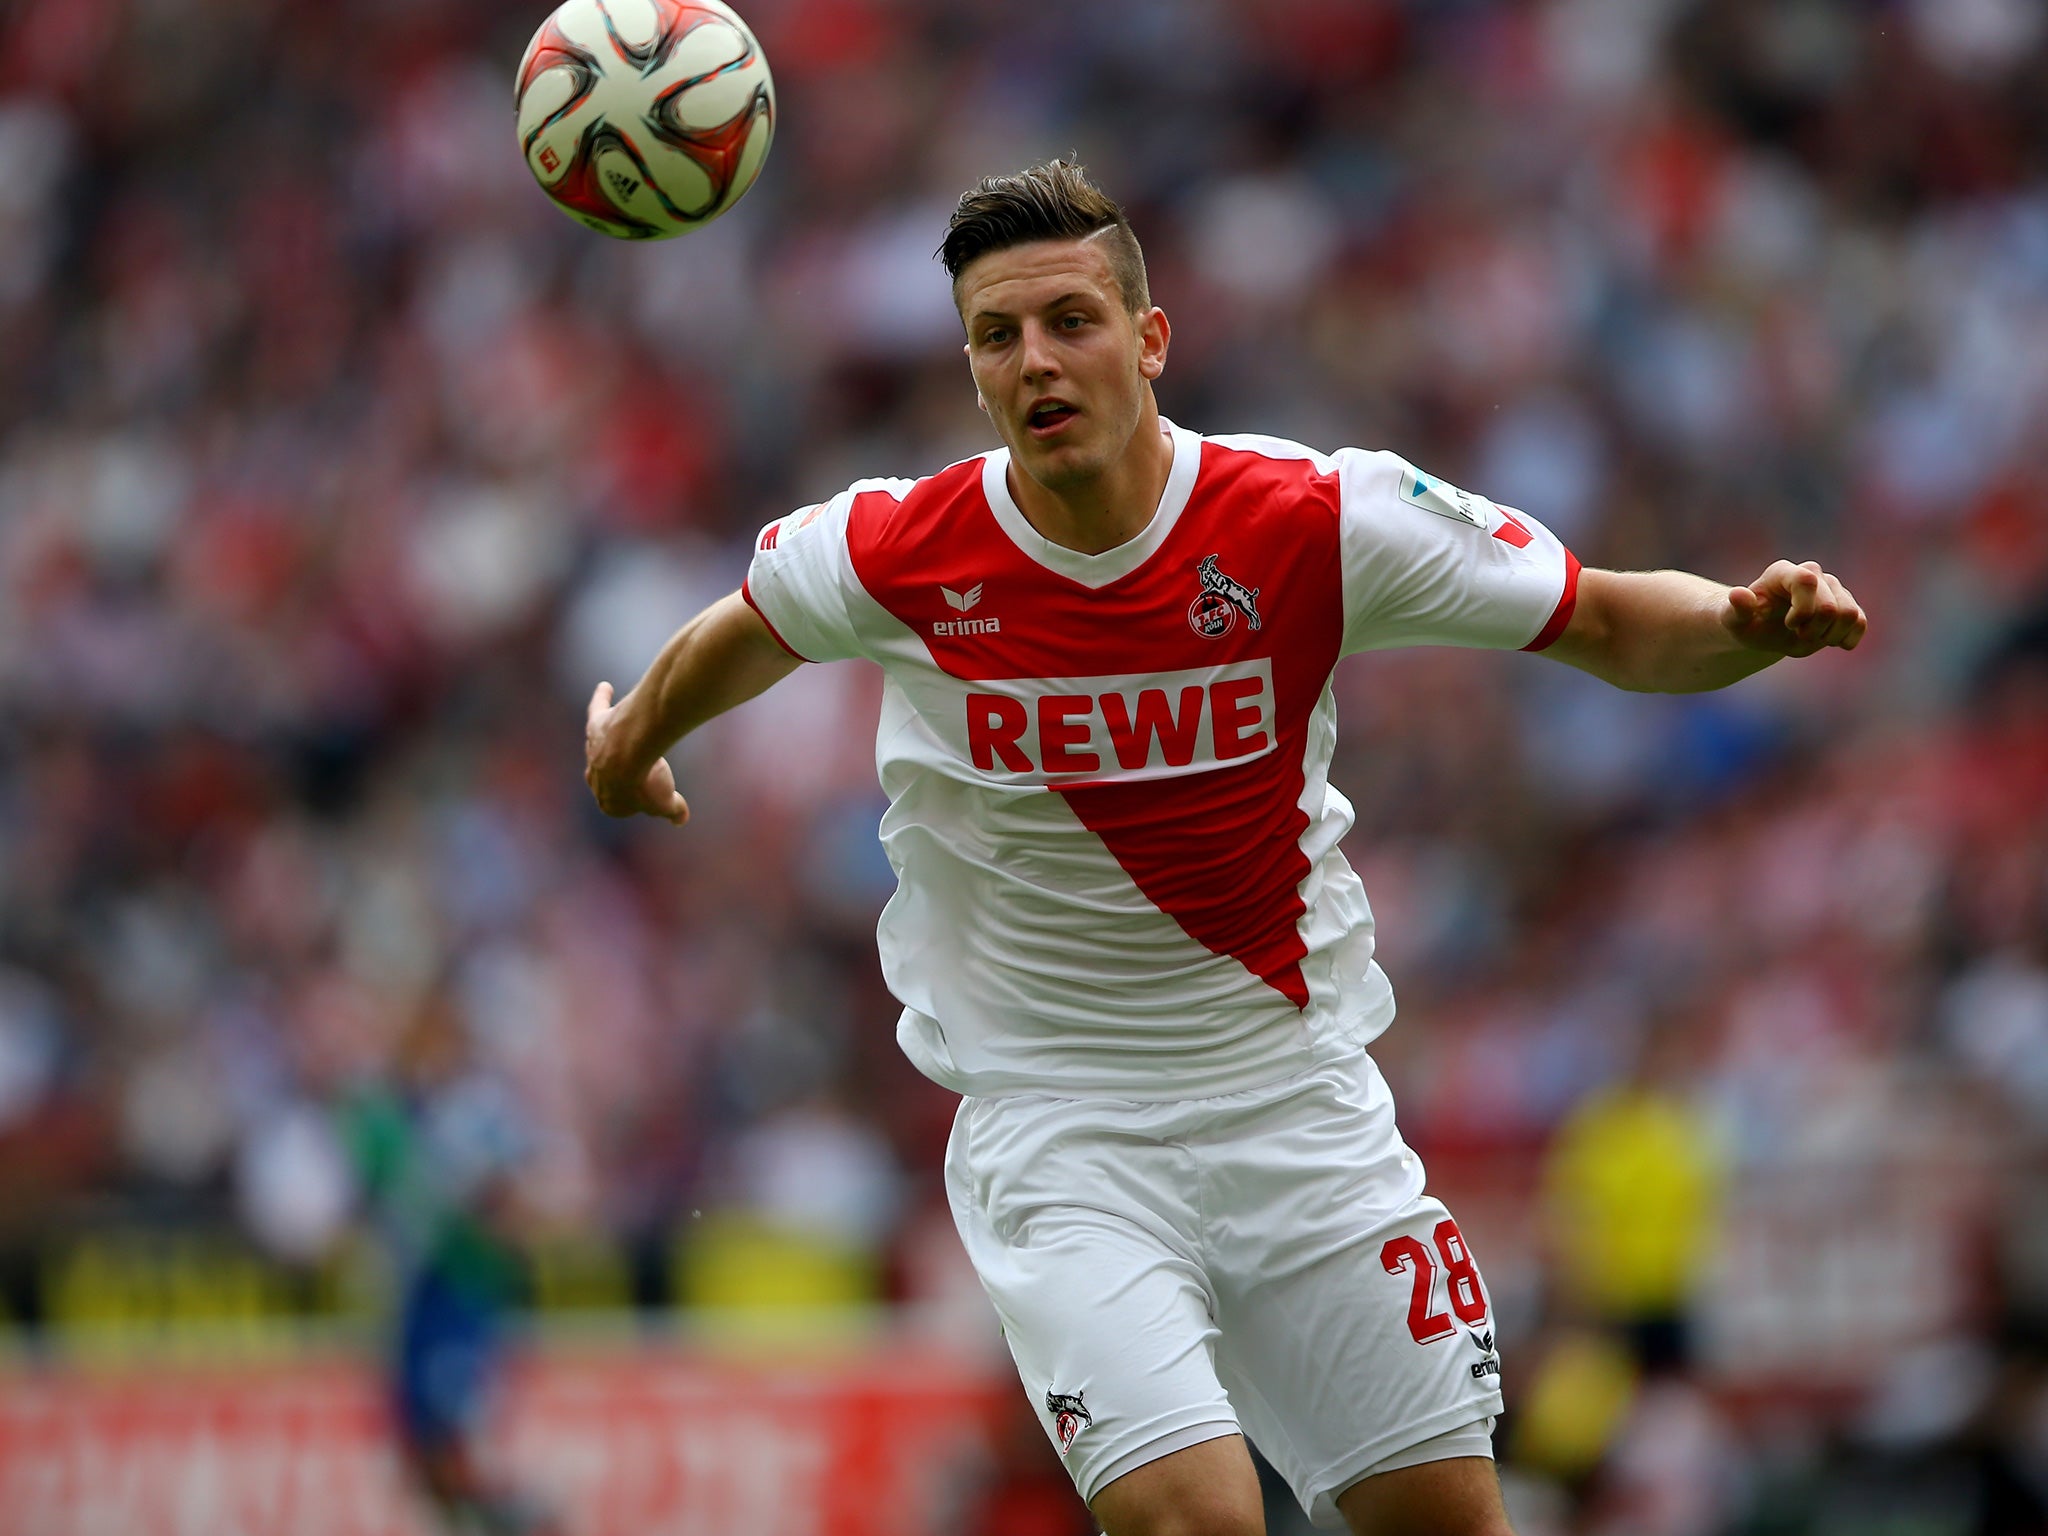 Wimmer has signed a five-year deal at White Hart Lane